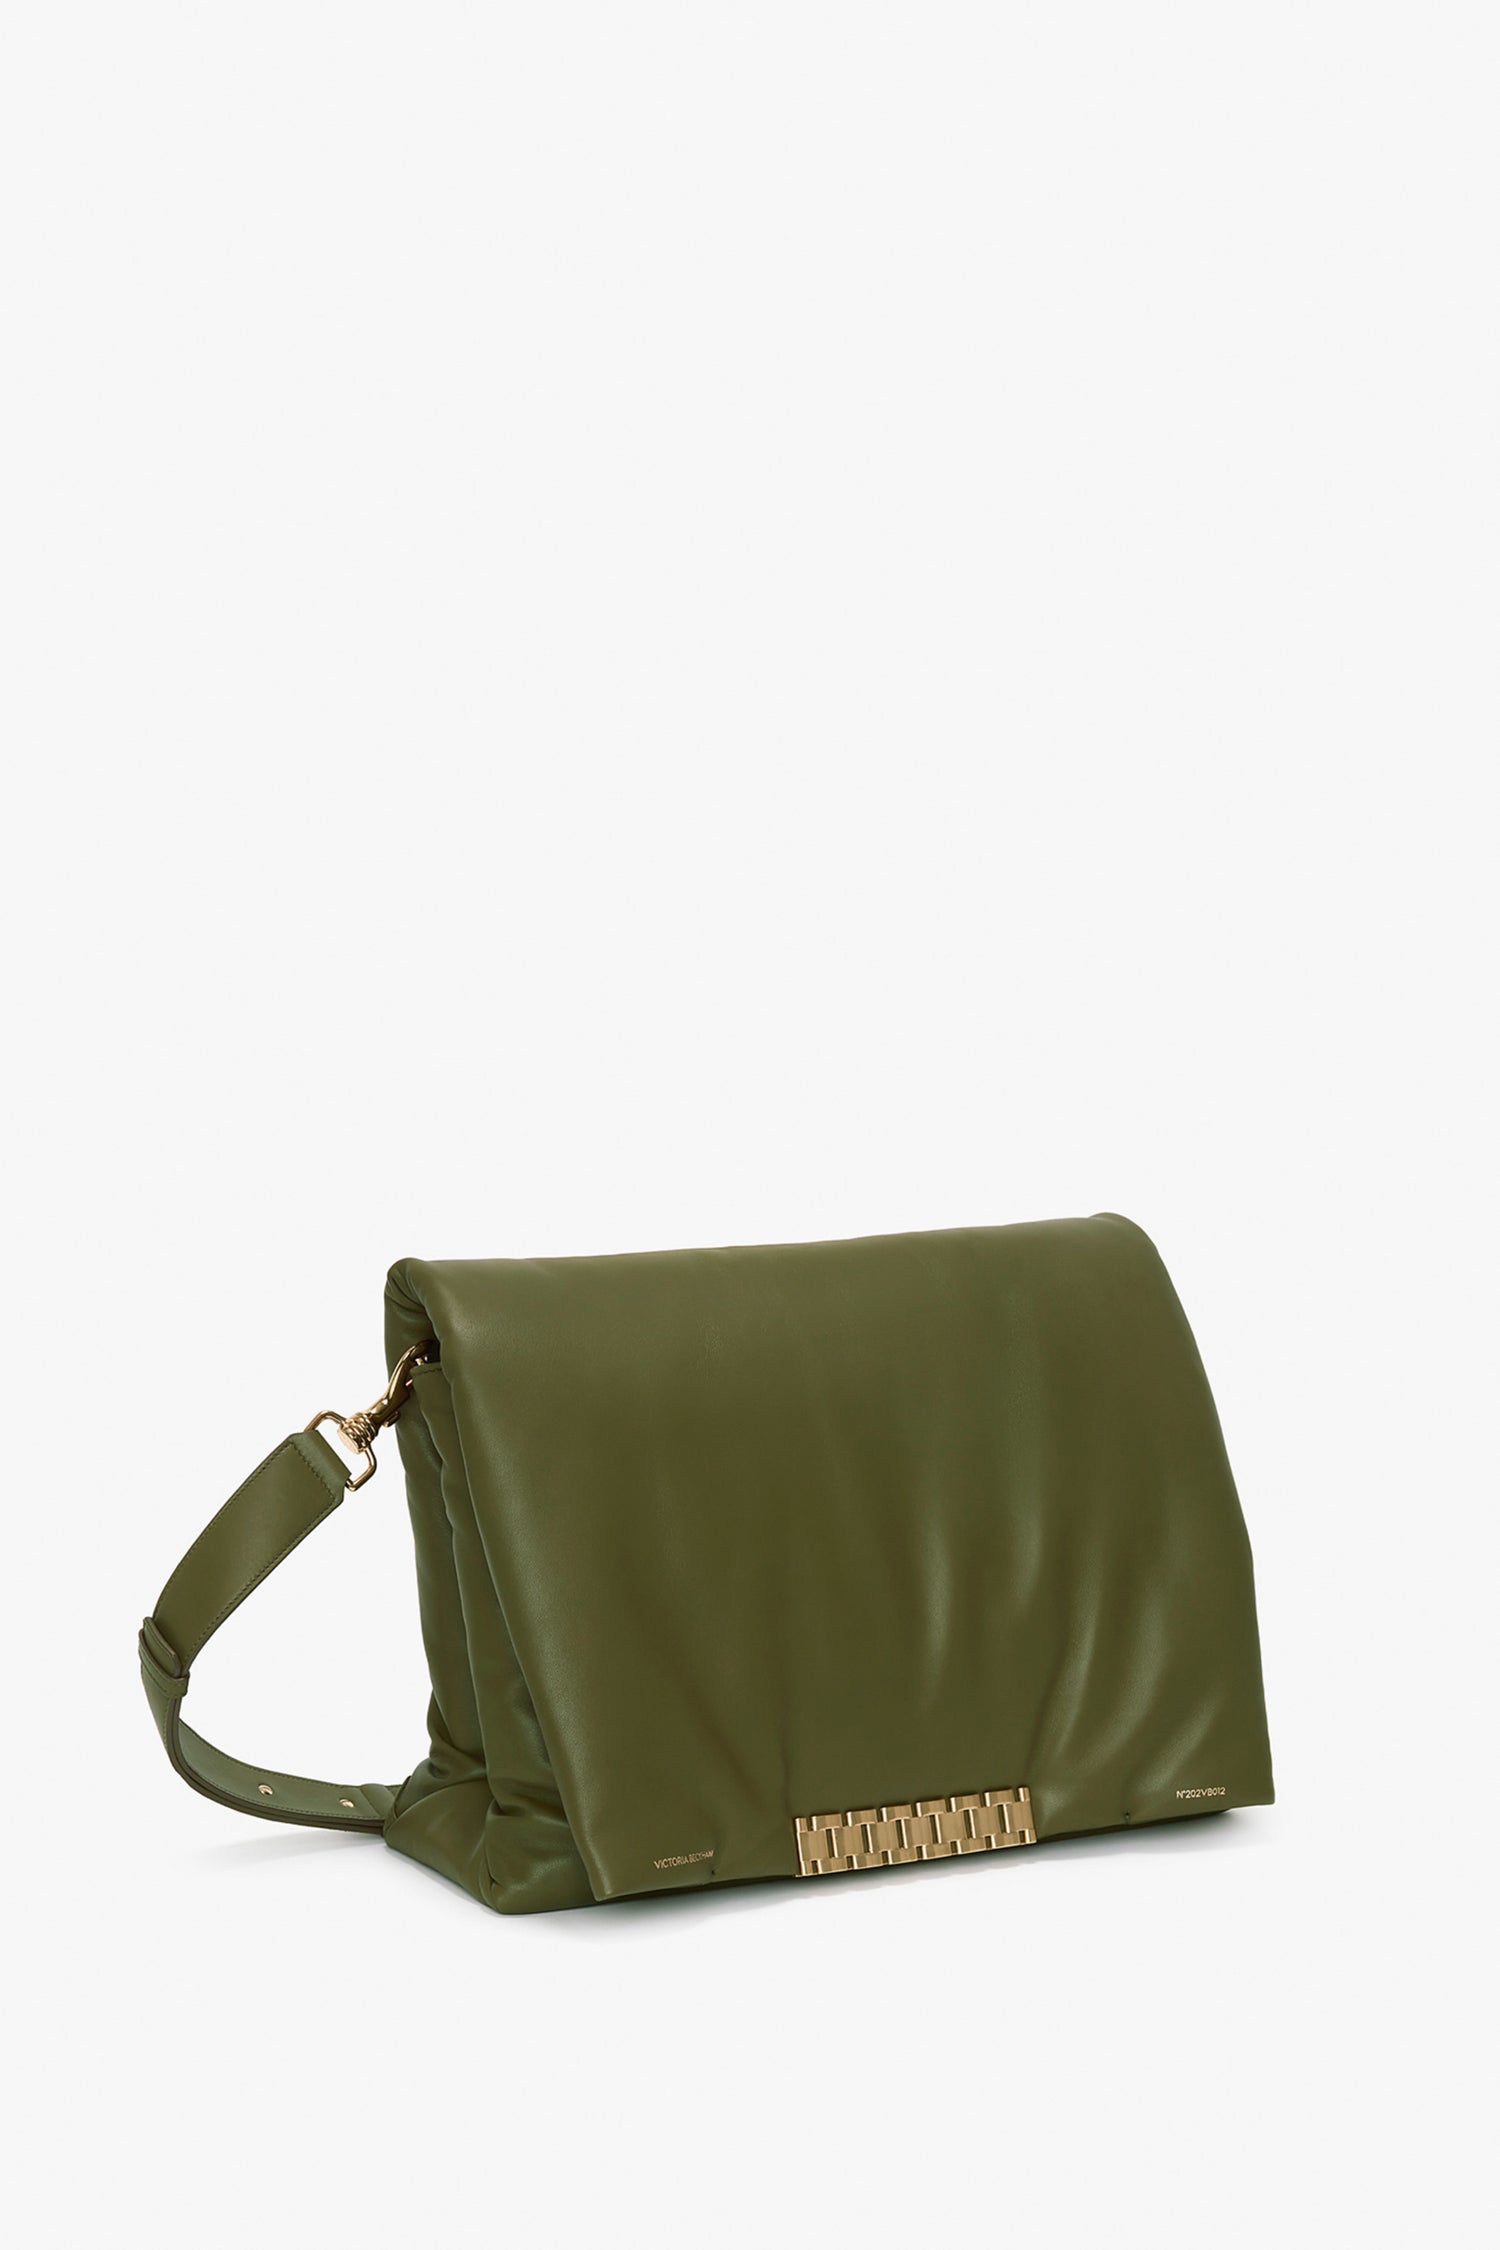 Victoria Beckham Puffy Jumbo Chain Pouch In Khaki Leather with a long adjustable strap and a gold clasp.